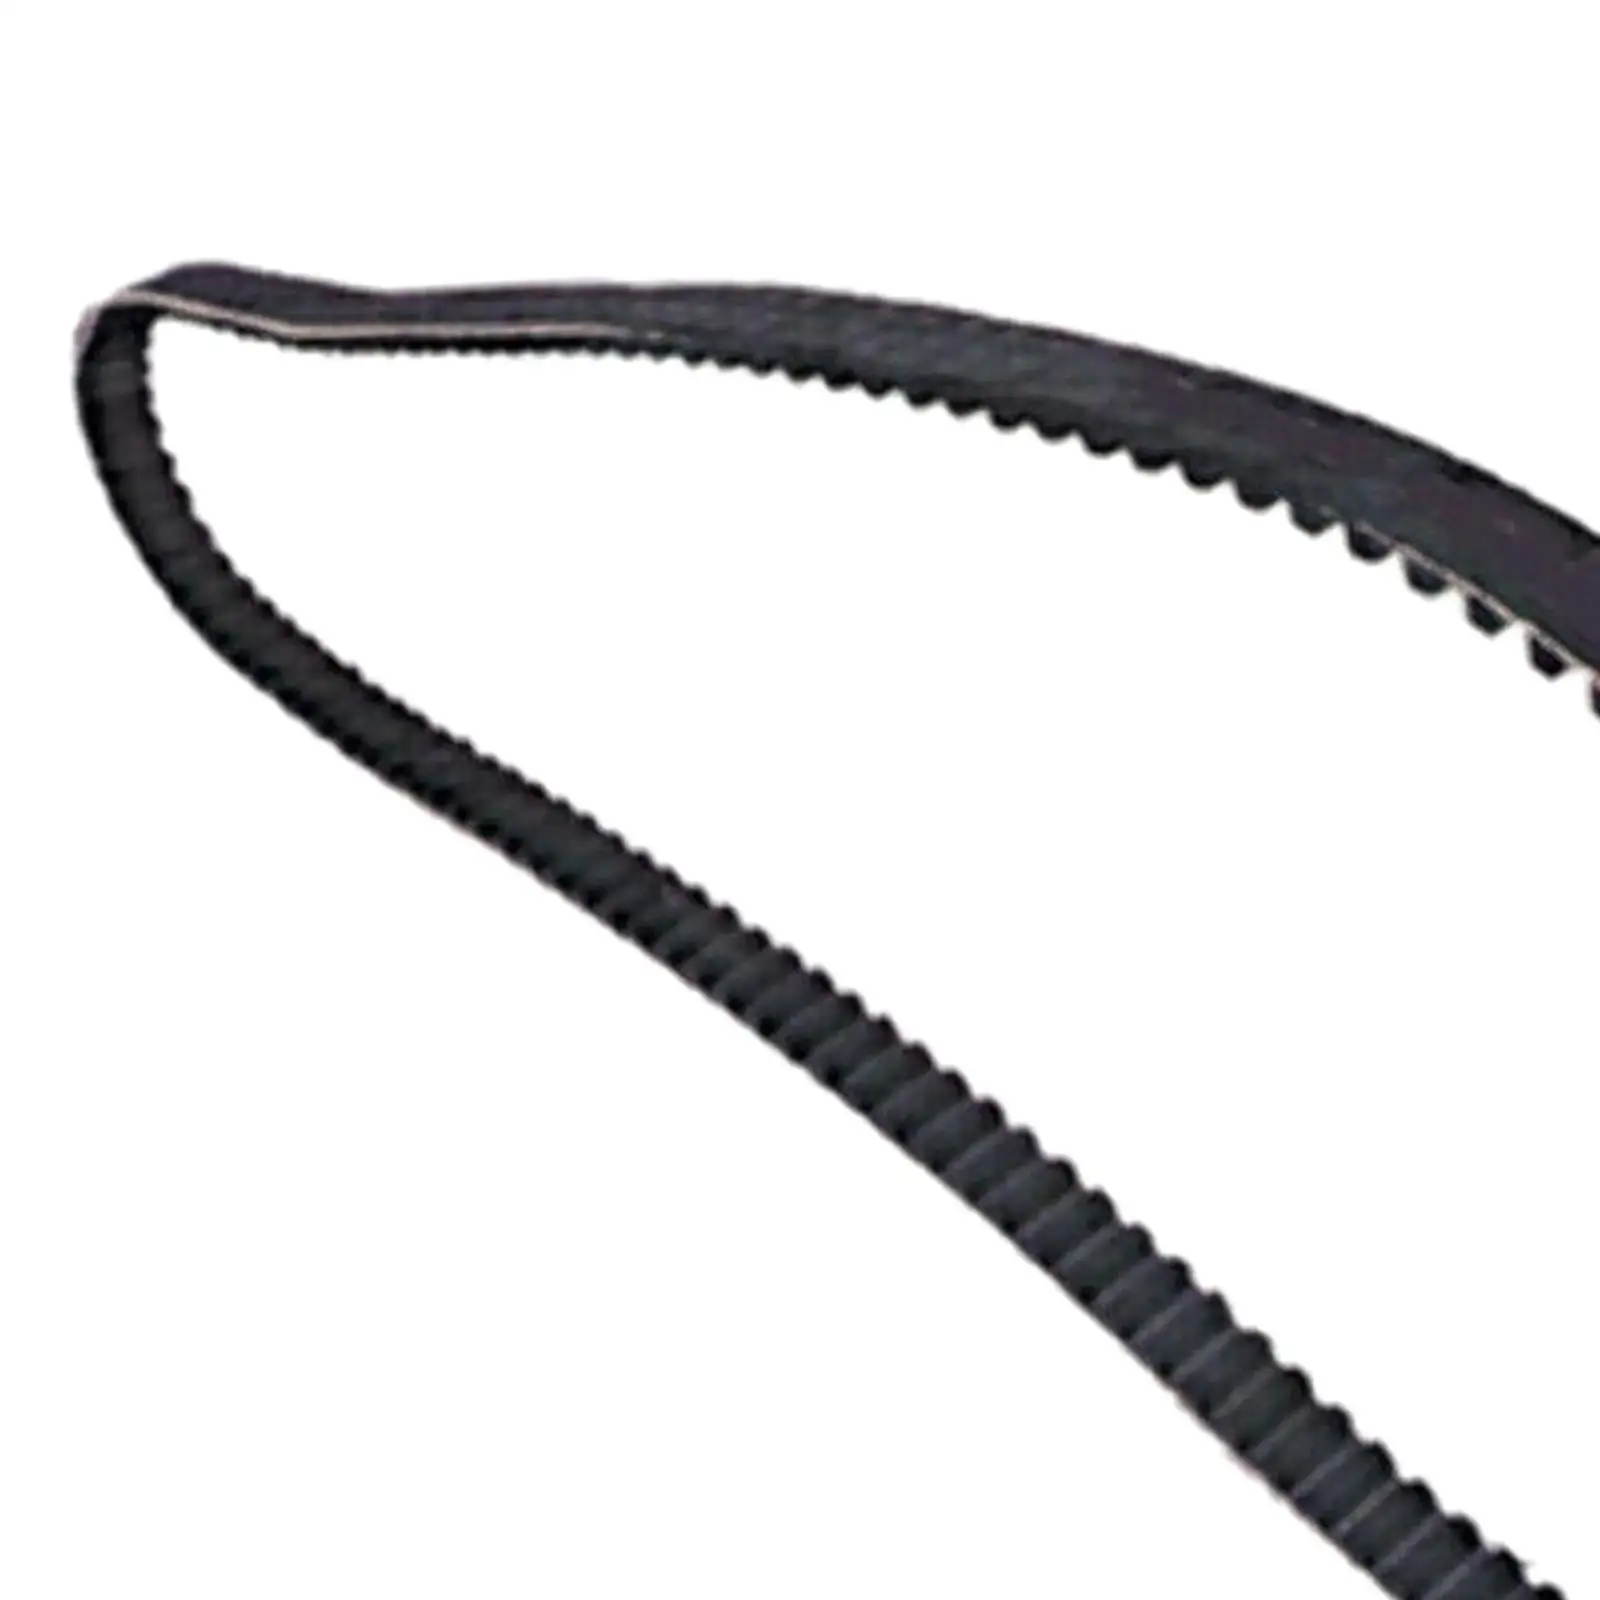 Rear Drive Belt Rubber Motorcycle Accessories 58-433 133 Tooth 1 1/8